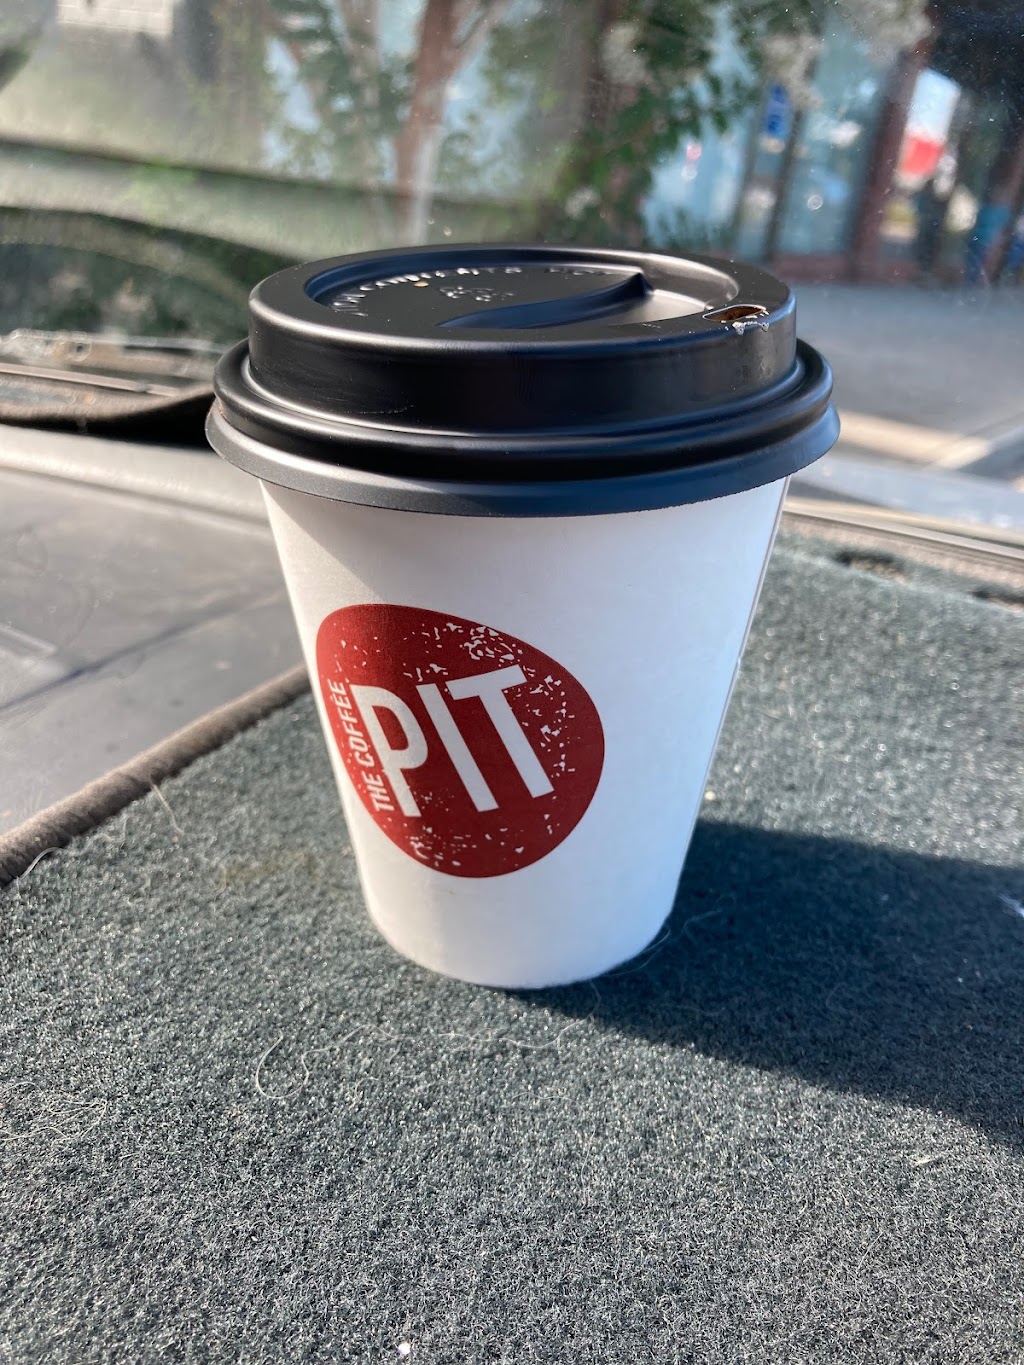 The Coffee Pit | cafe | 317-319 York St, Sale VIC 3850, Australia | 0351447255 OR +61 3 5144 7255